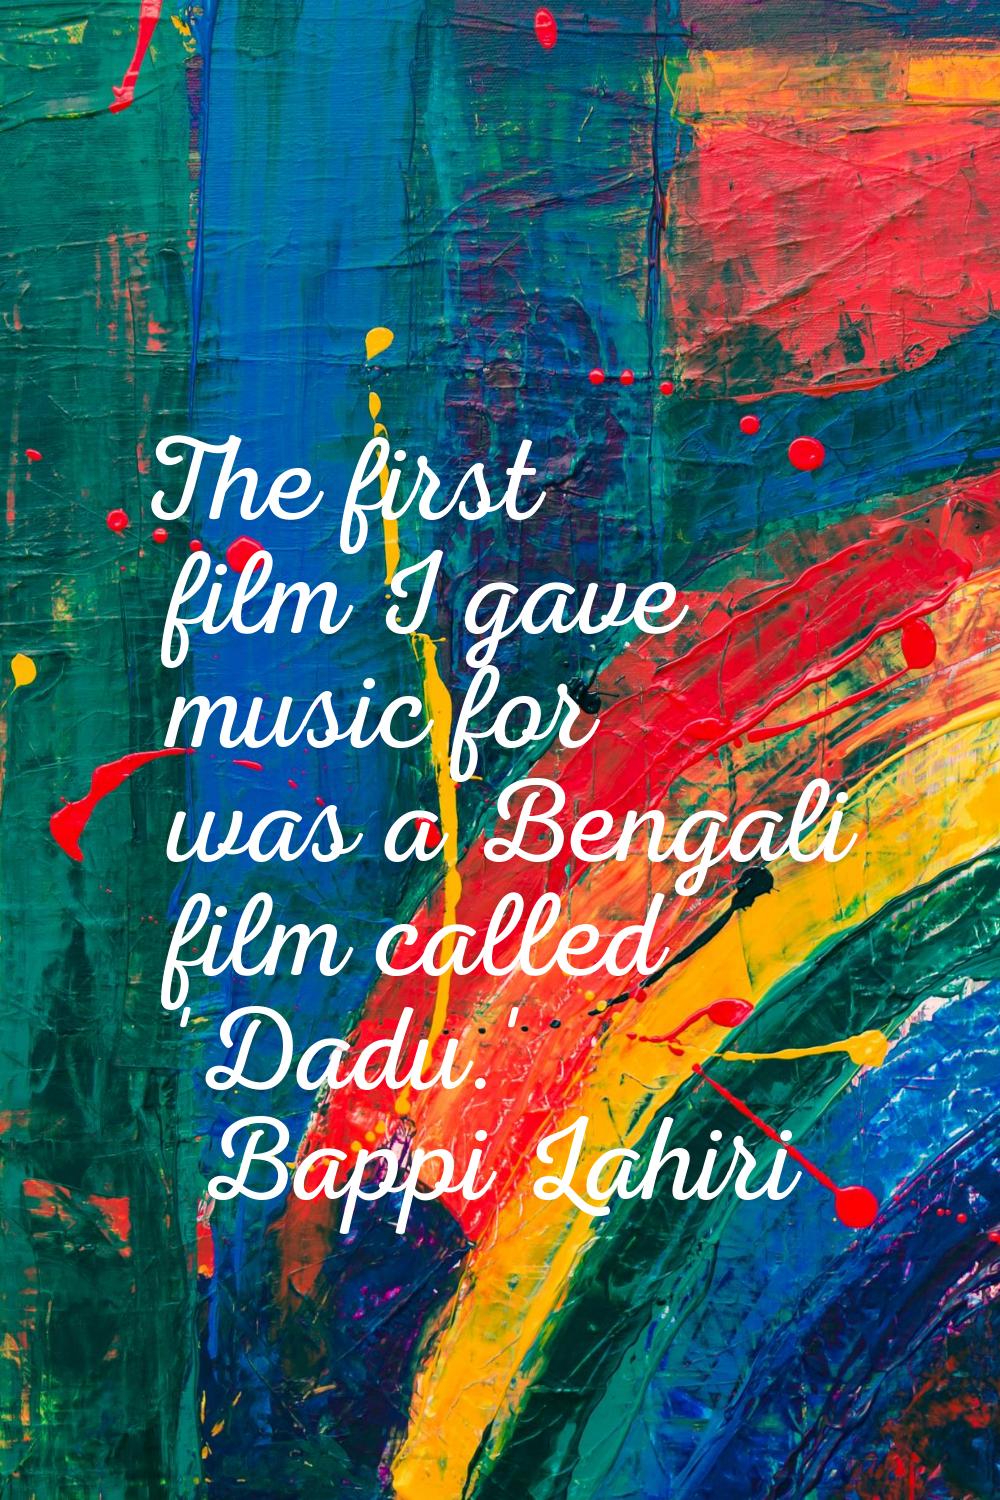 The first film I gave music for was a Bengali film called 'Dadu.'